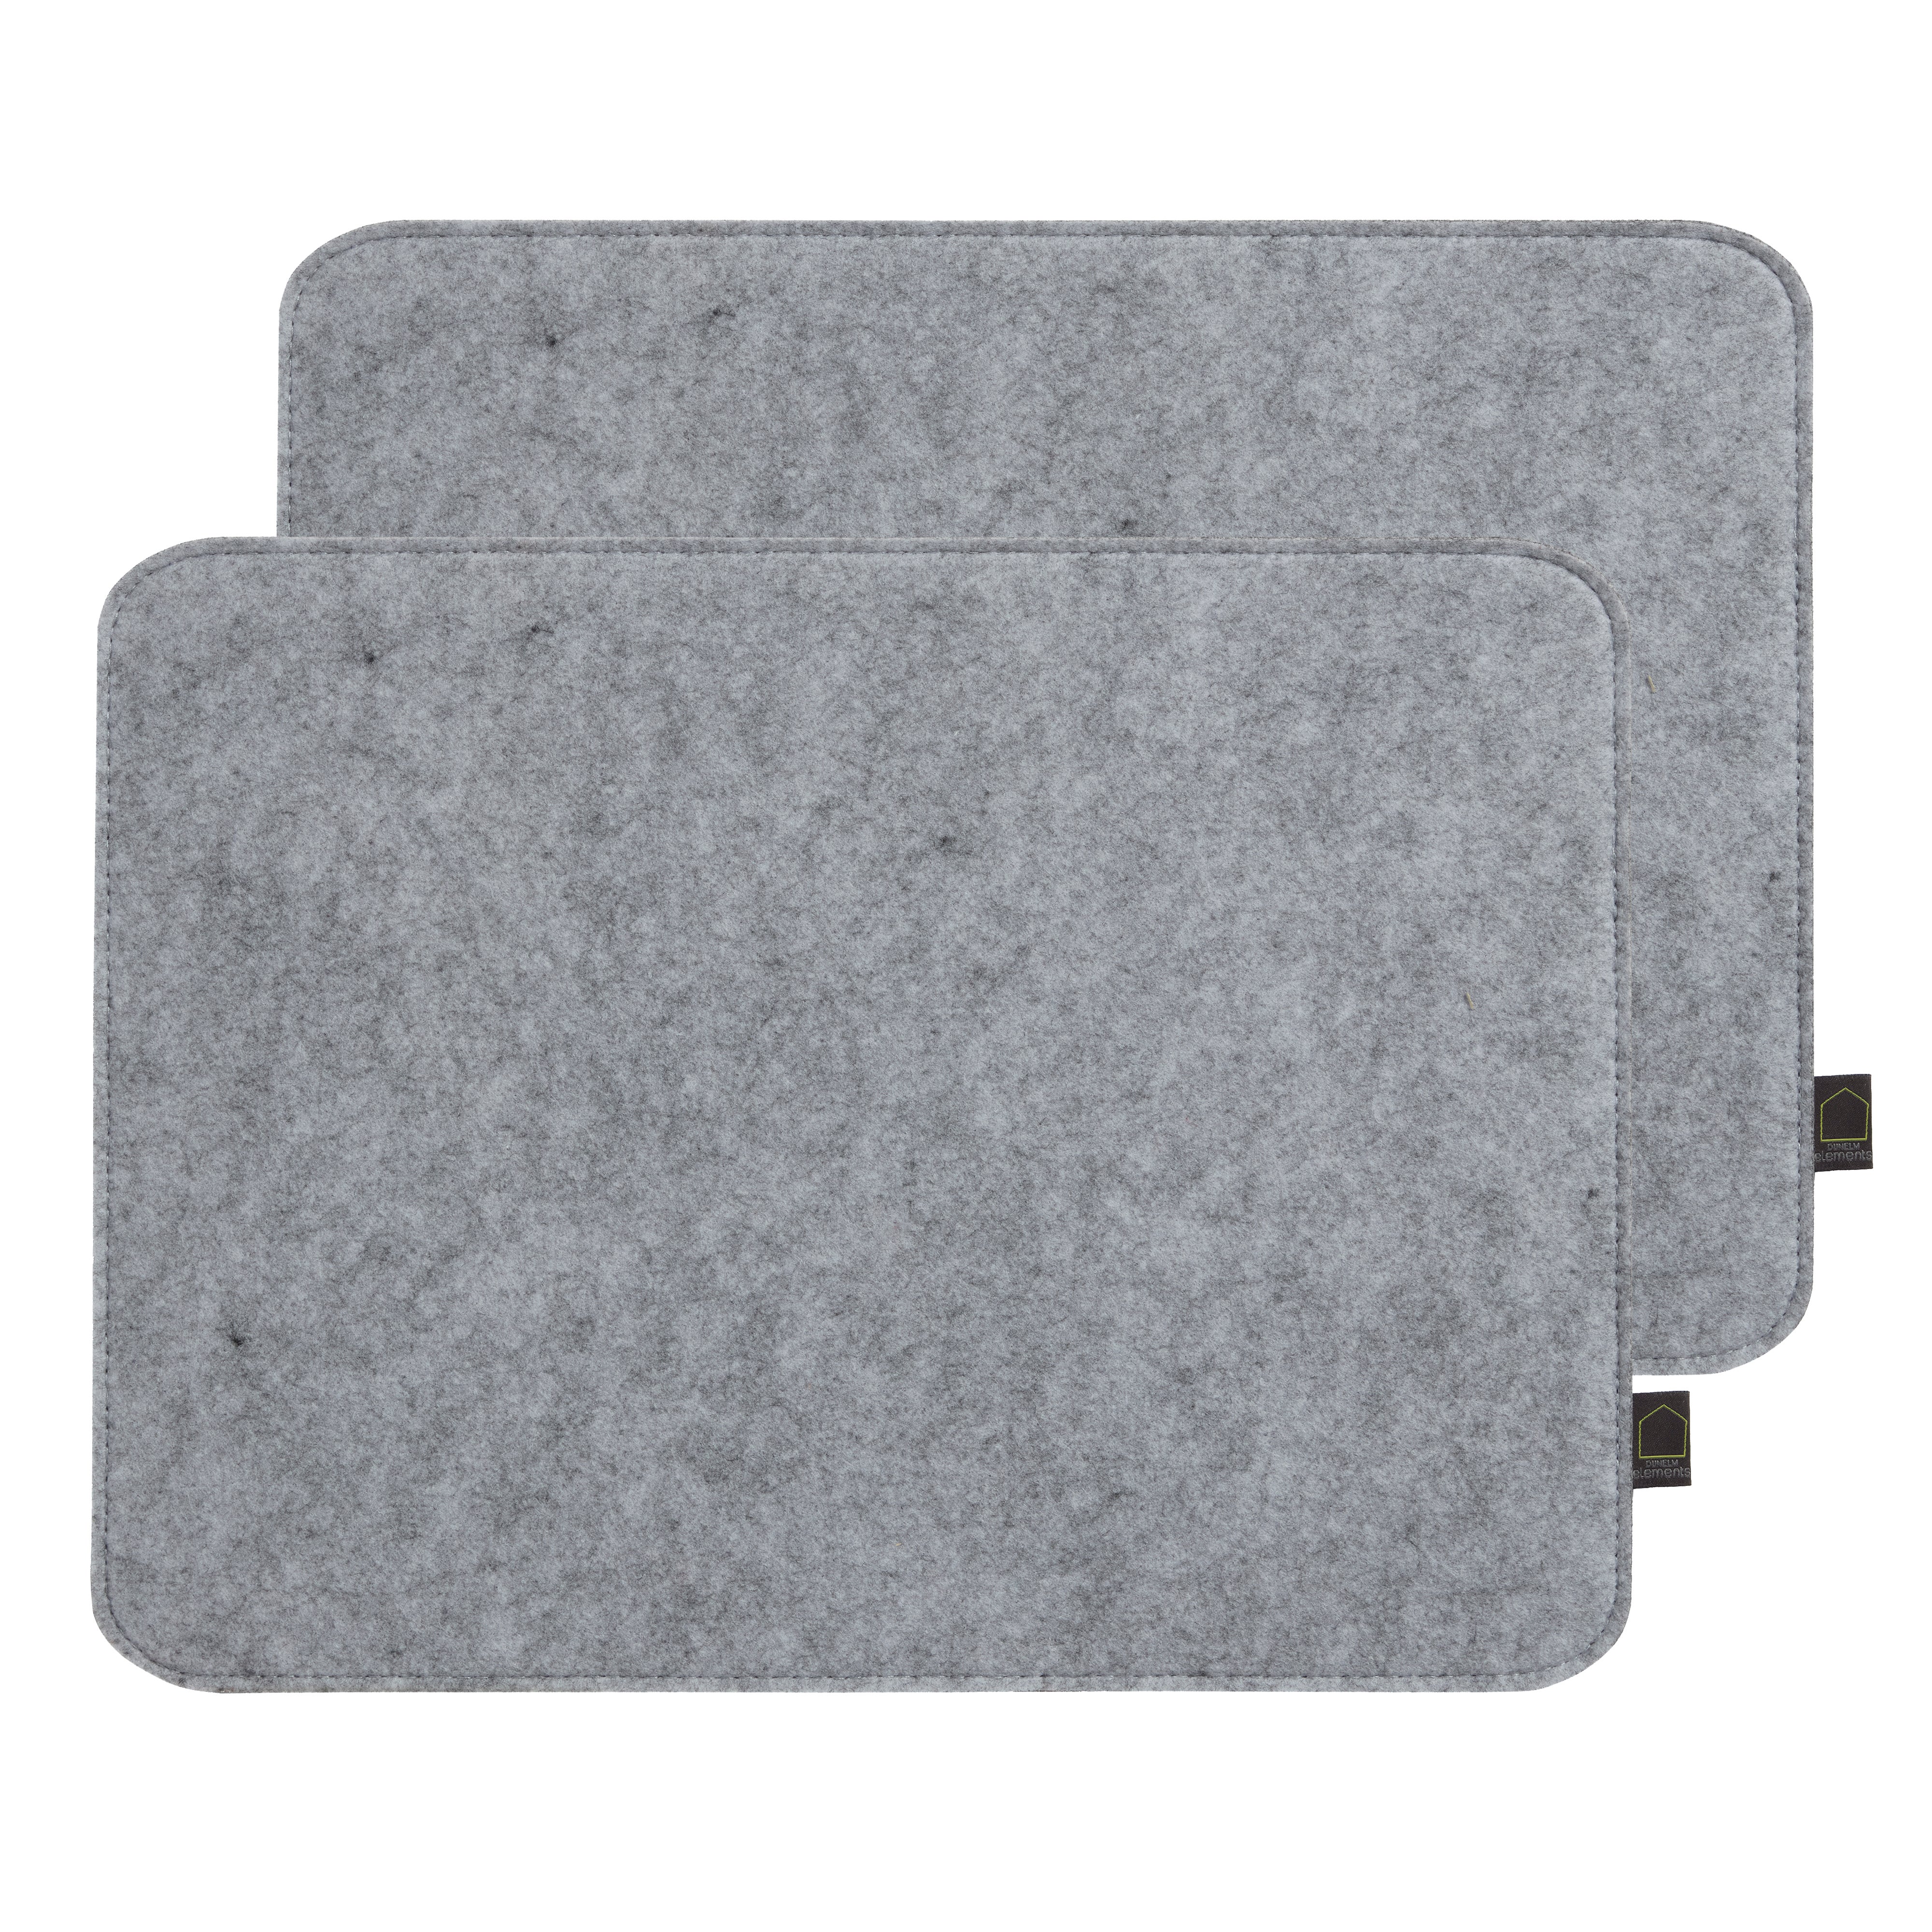 Elements Set of 2 Grey Placemats